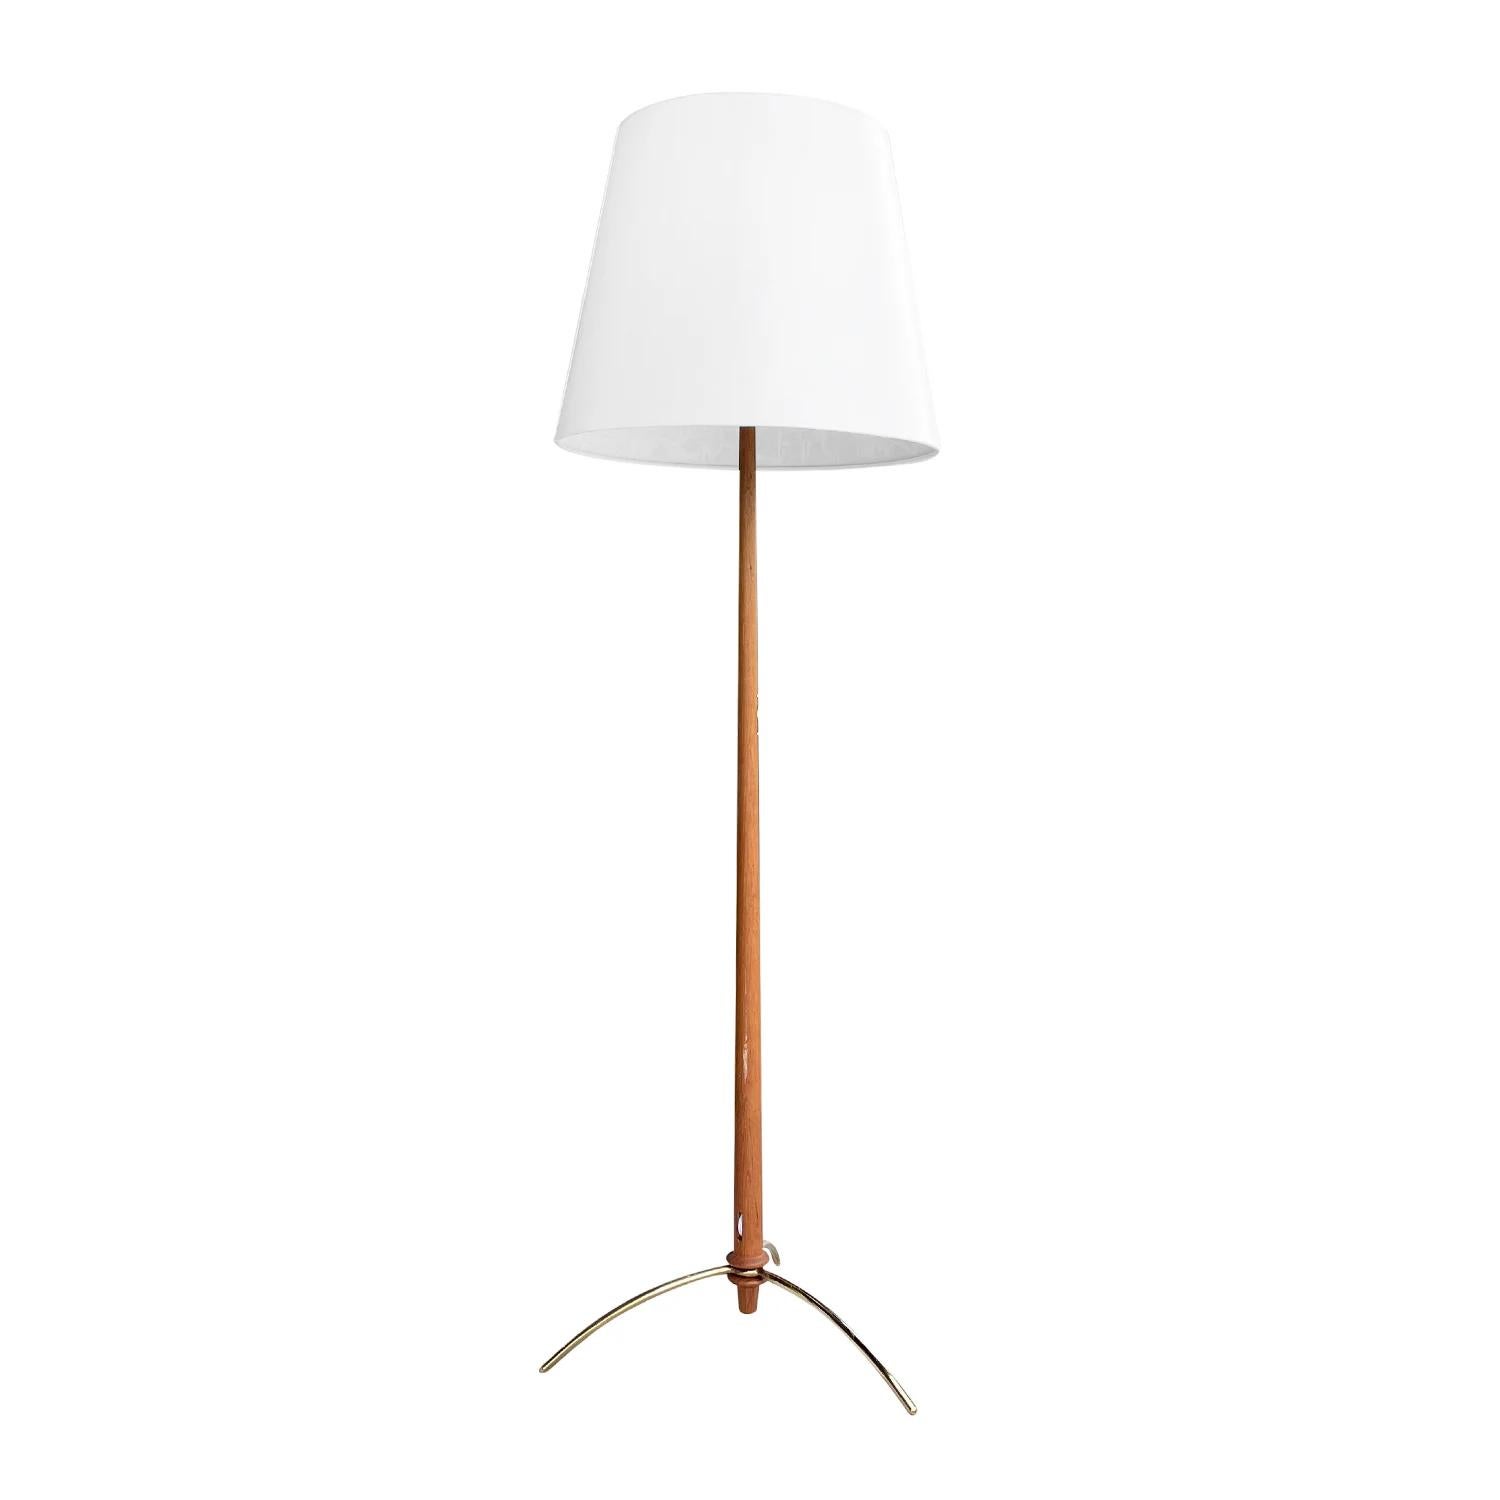 A light-brown, vintage Mid-Century Modern Swedish floor lamp made of hand crafted Teakwood, composed with its original light switch and a new white round shade, designed by Hans-Agne Jakobsson in good condition. The stem of the Scandinavian lighting